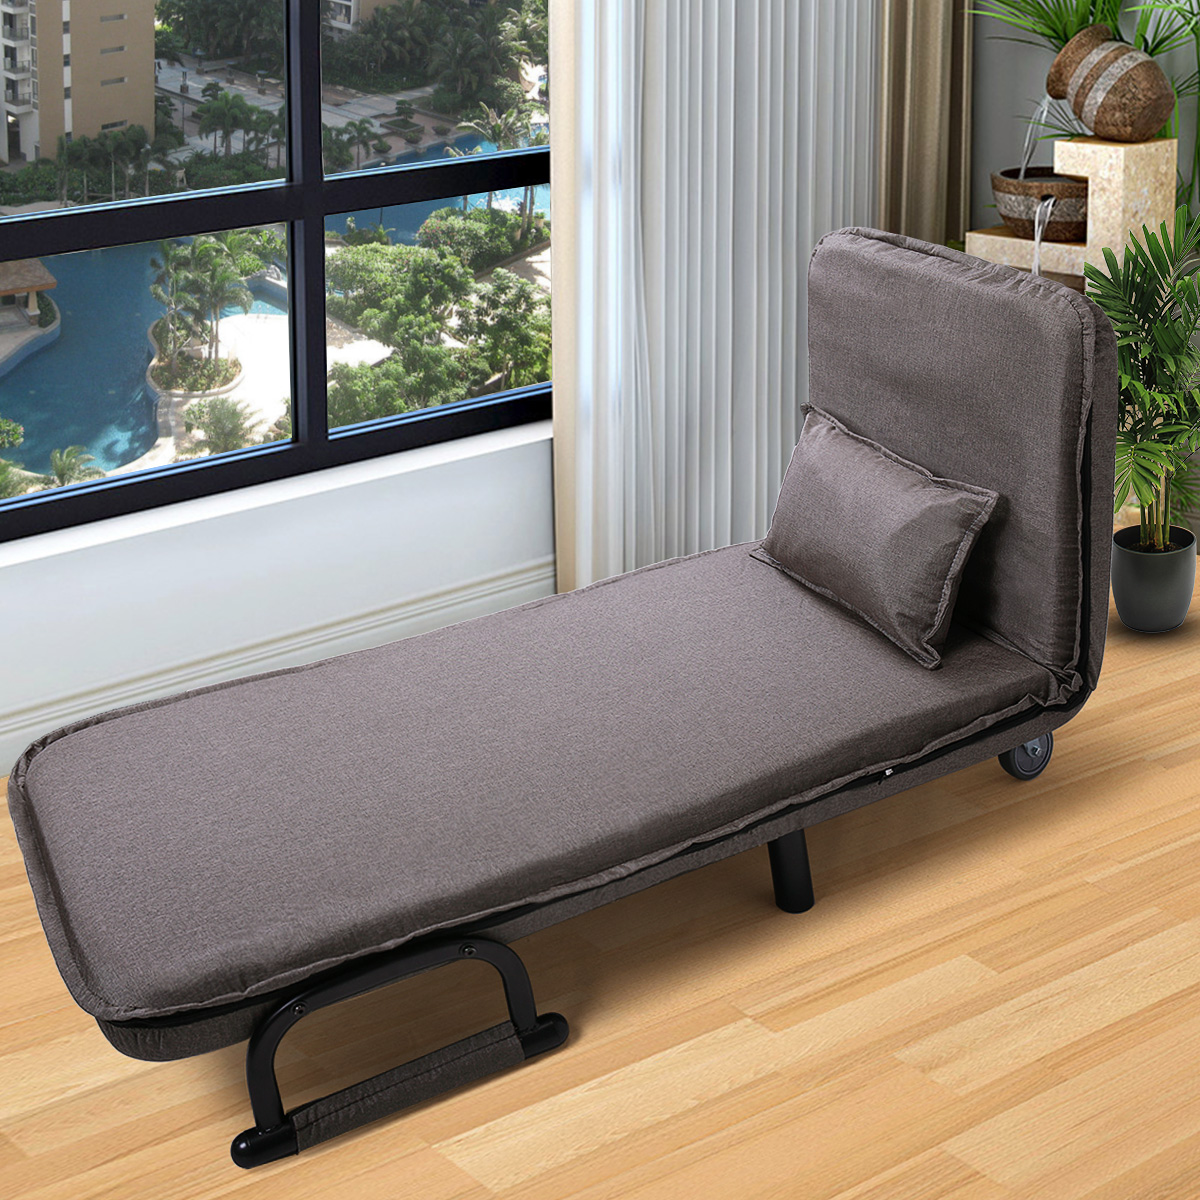 Veryke Sofa Bed, Floor Chair, Recliner Chair, Adjustable Folding Lazy Sofa Chair, Sofa Couch Beds, Lounge Chair, Brown - image 3 of 8